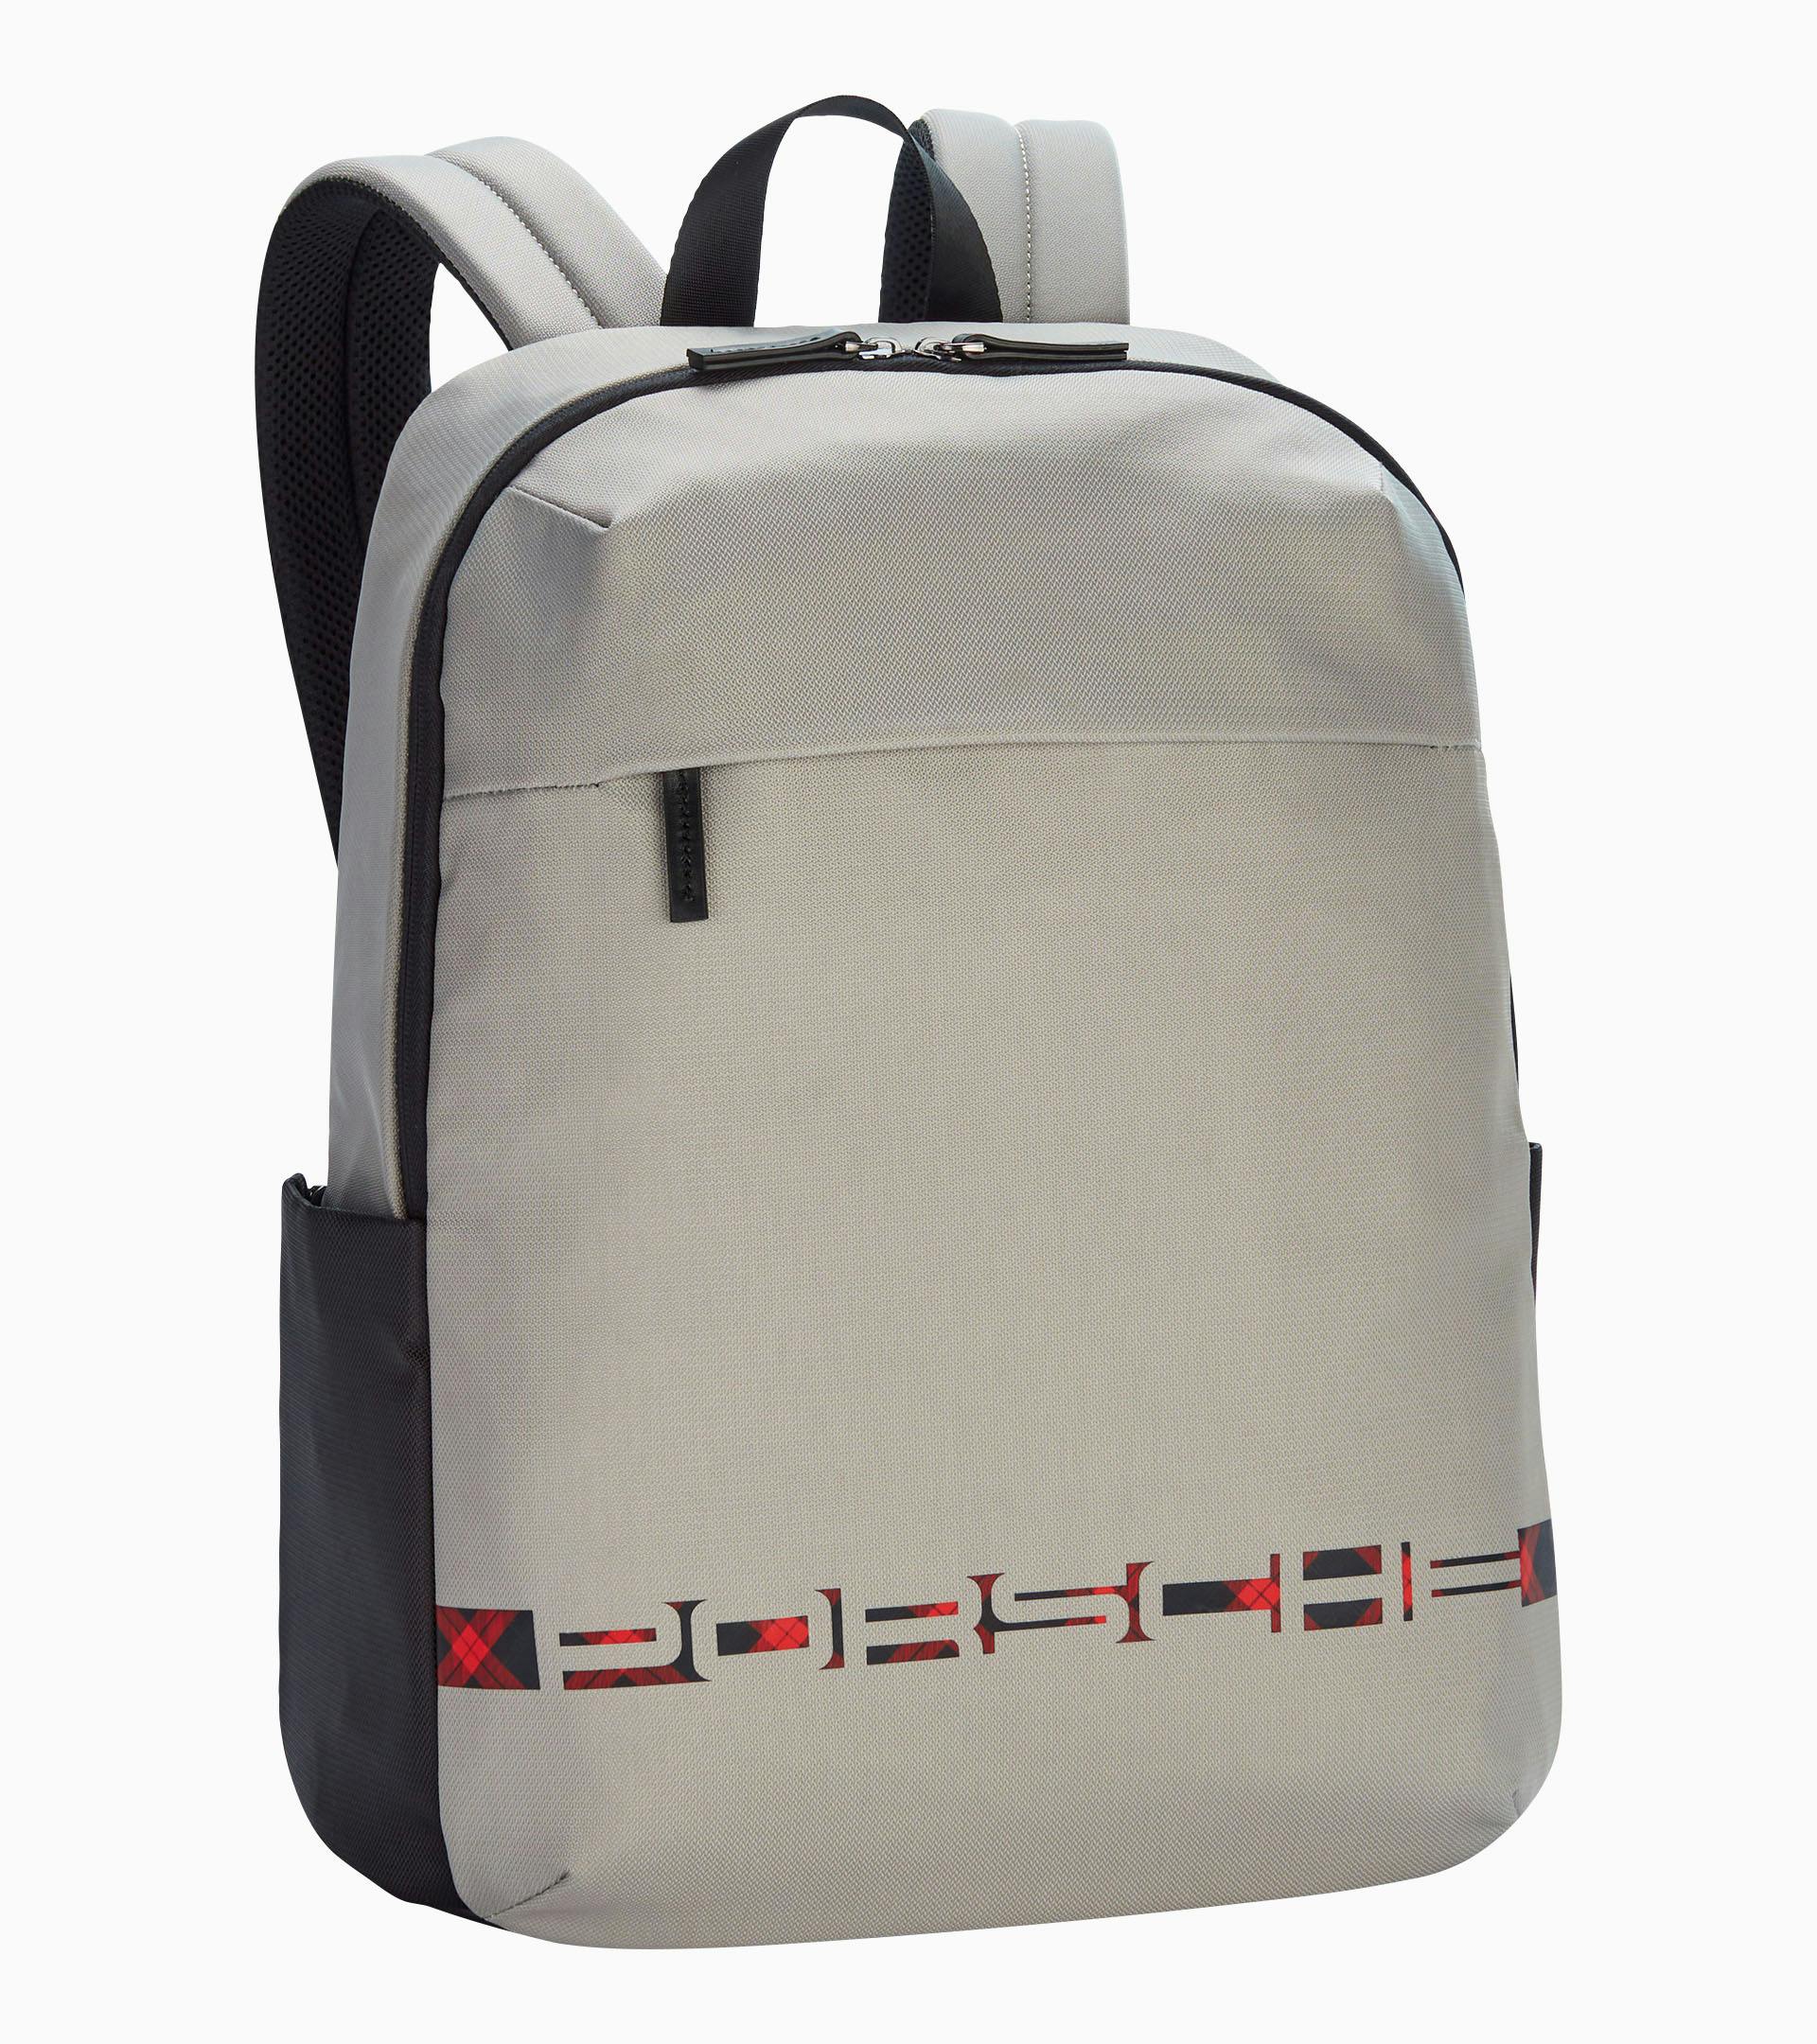 Backpack – Turbo No. 1